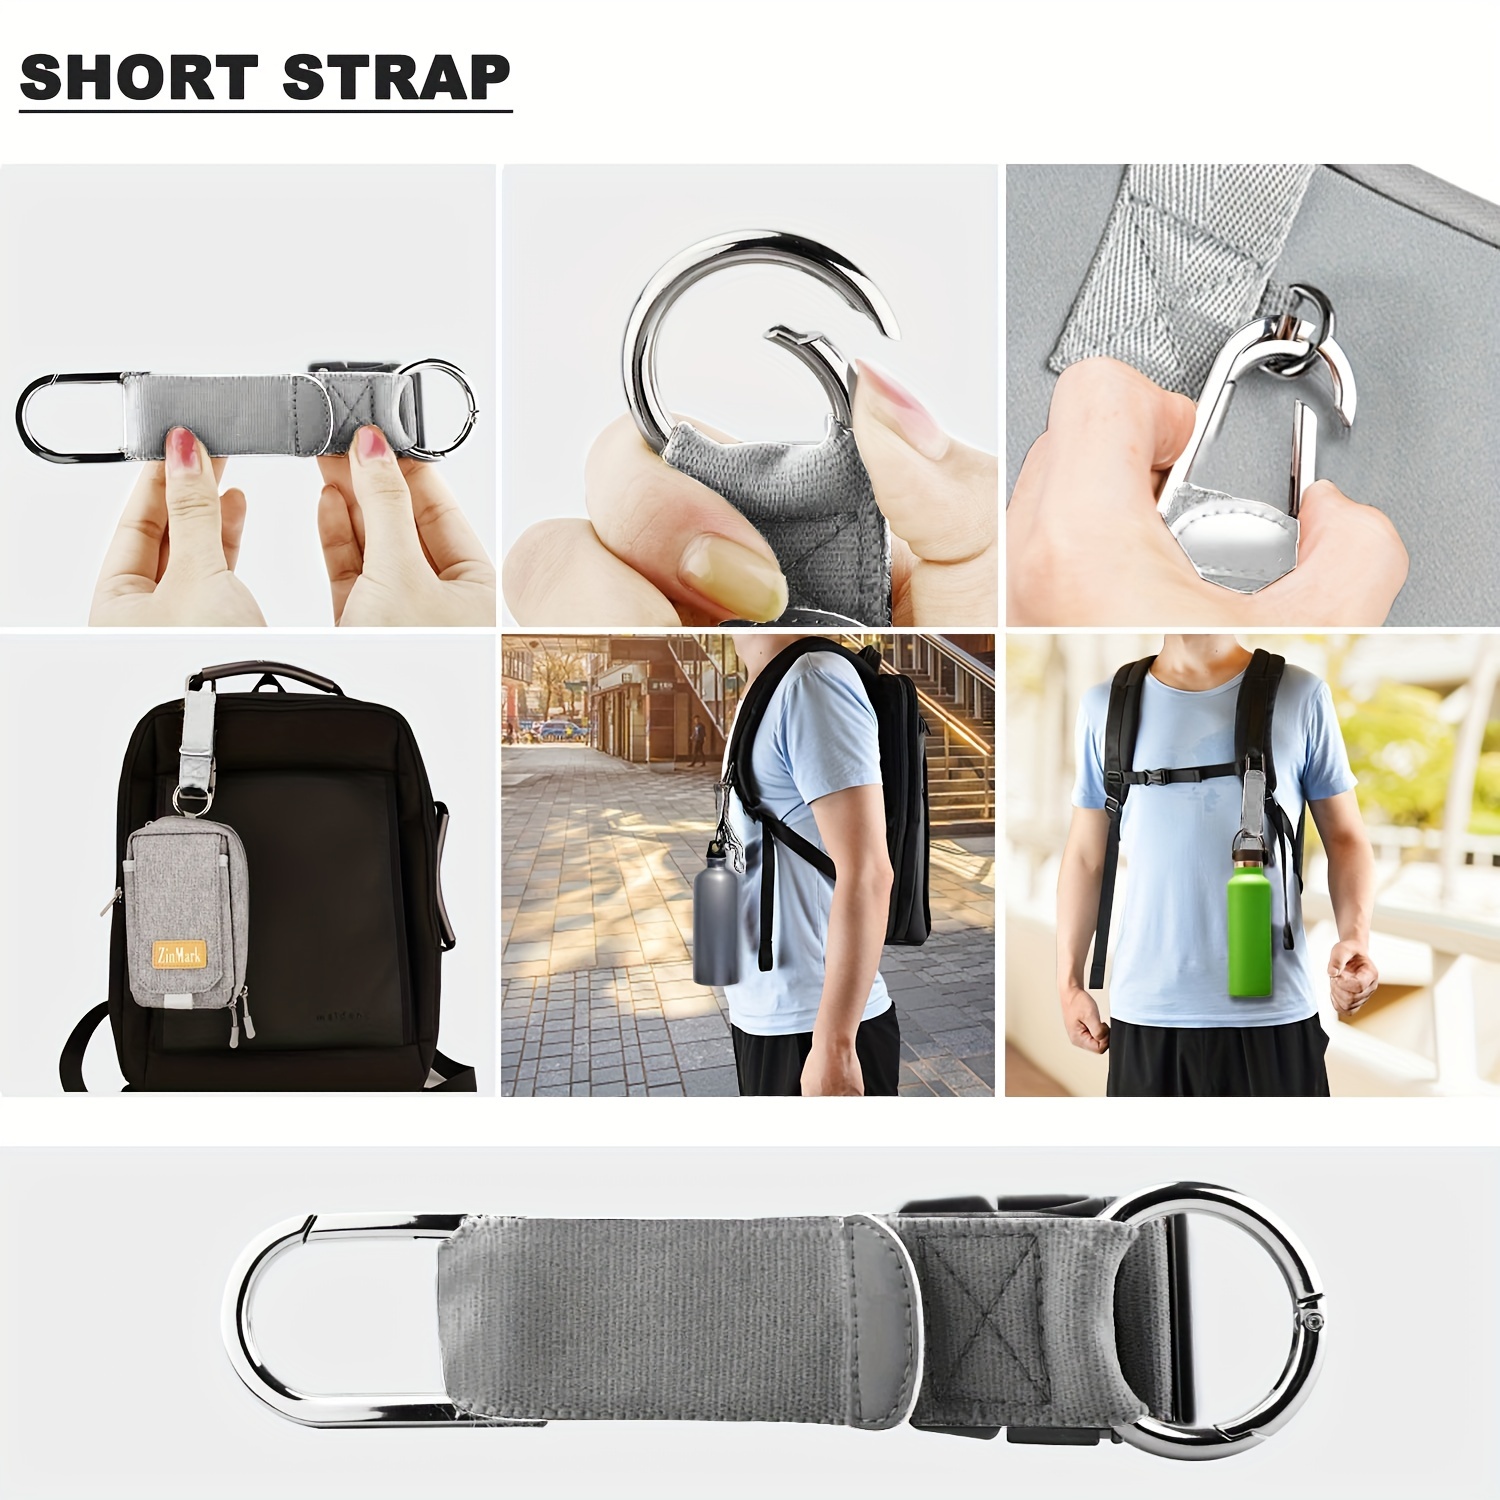 Add A Bag Luggage Strap Jacket Gripper, ZINZ D-Ring Hook Baggage